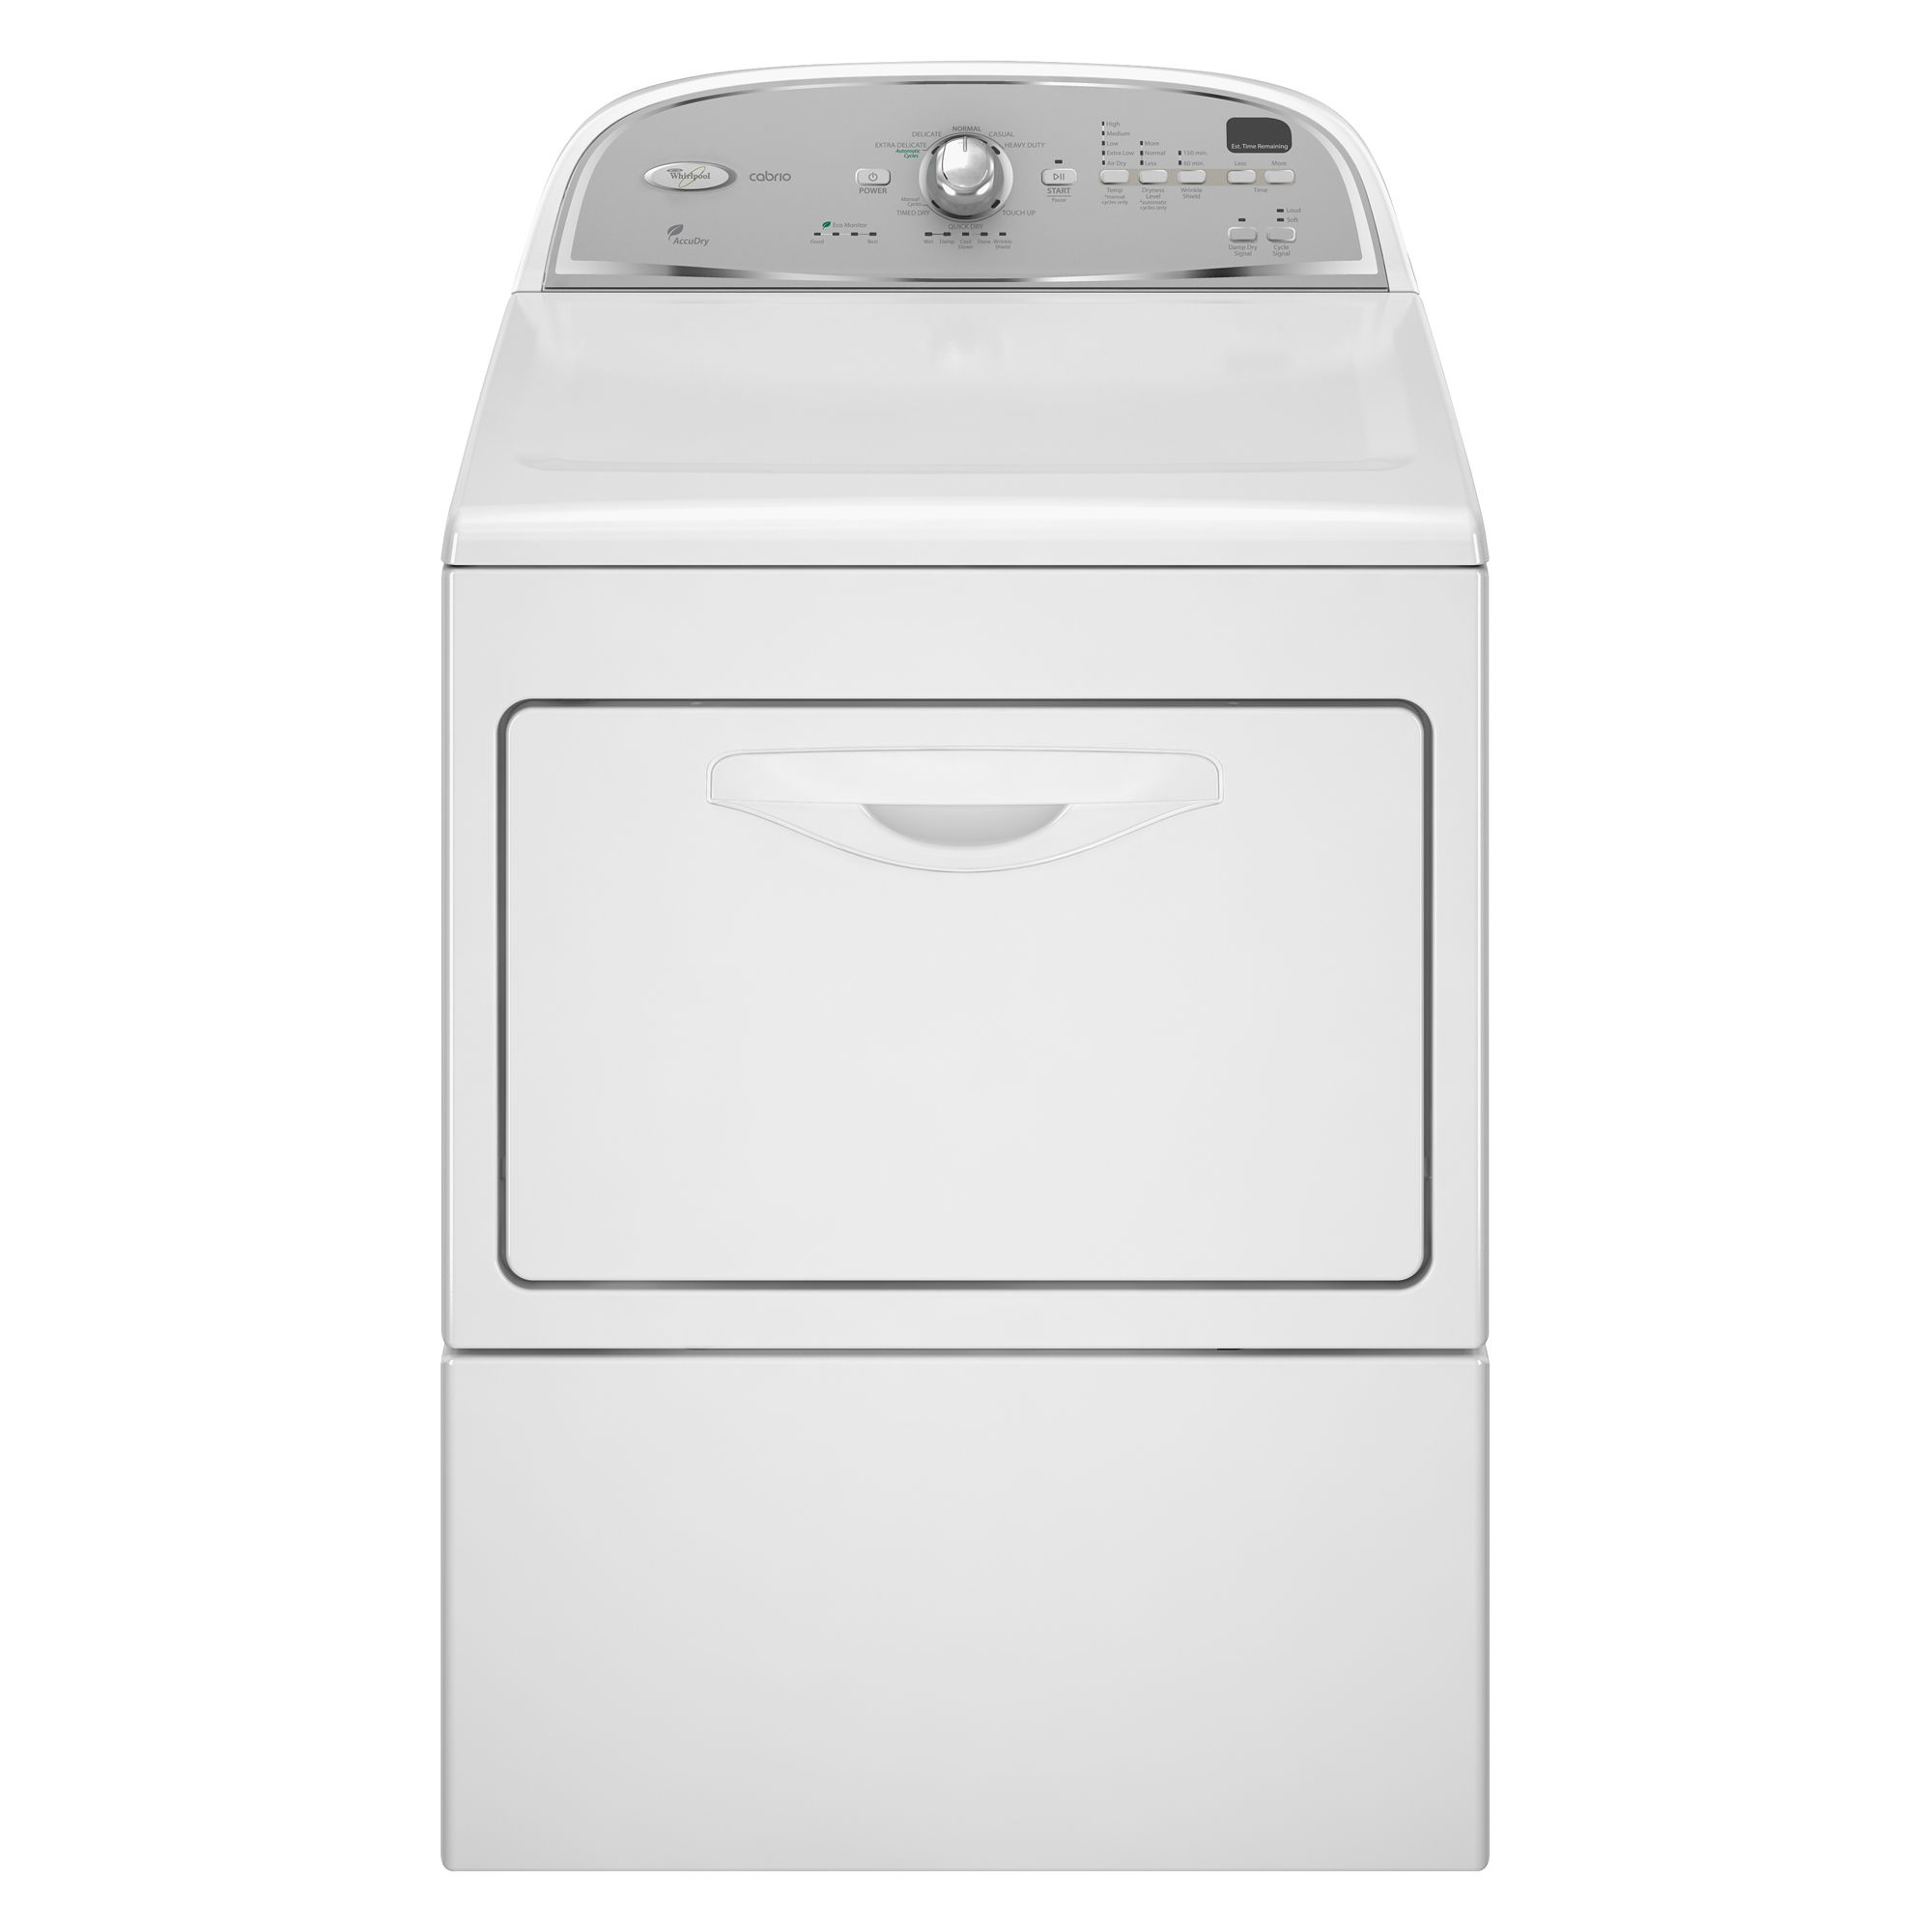 Whirlpool 7.4 cu. ft. Cabrio Electric Dryer - White 7.0 cu. ft. and greater